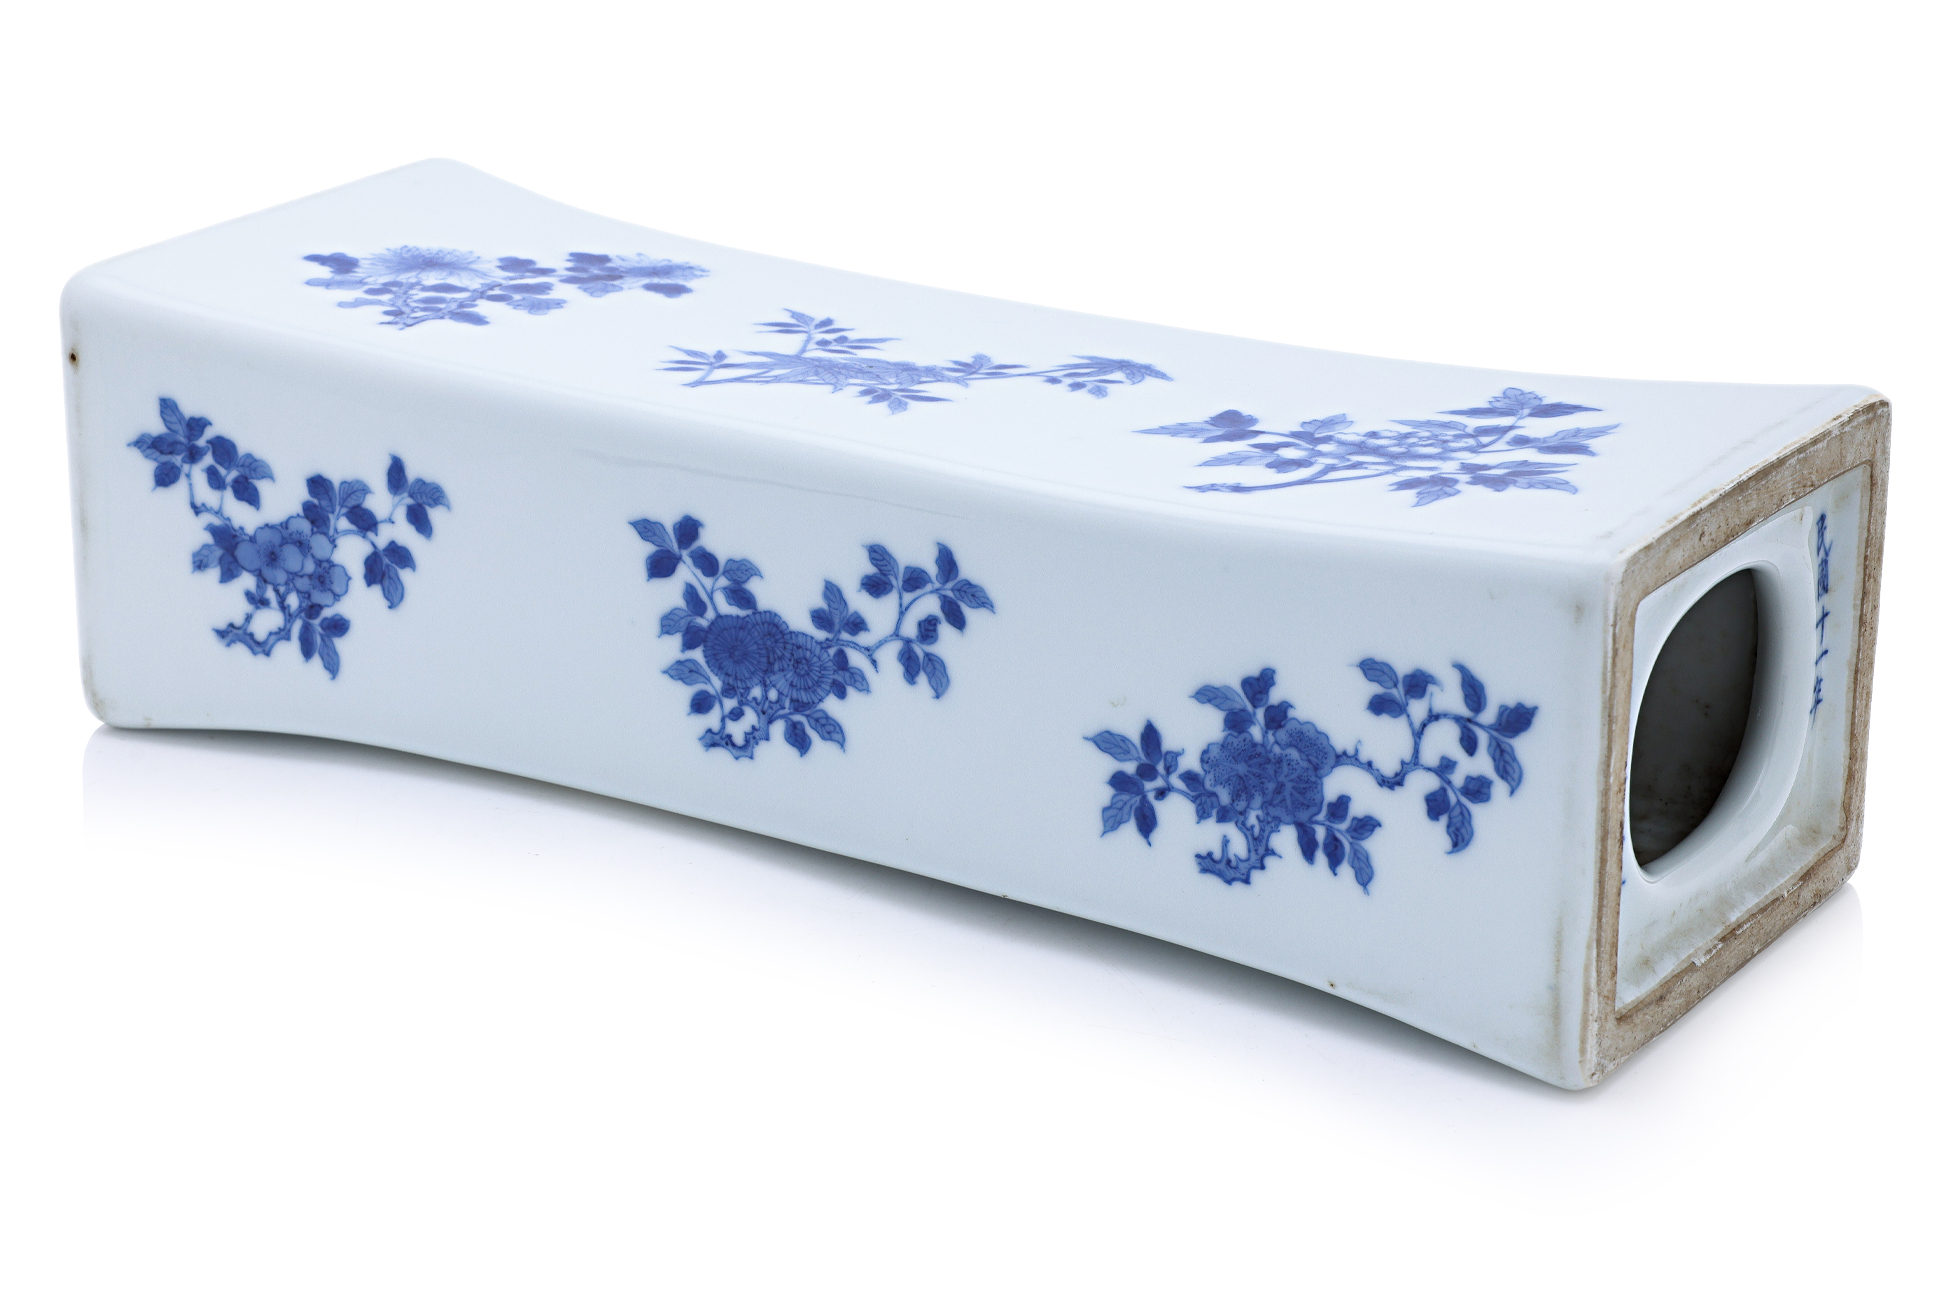 A LARGE BLUE AND WHITE PORCELAIN PILLOW - Image 2 of 24